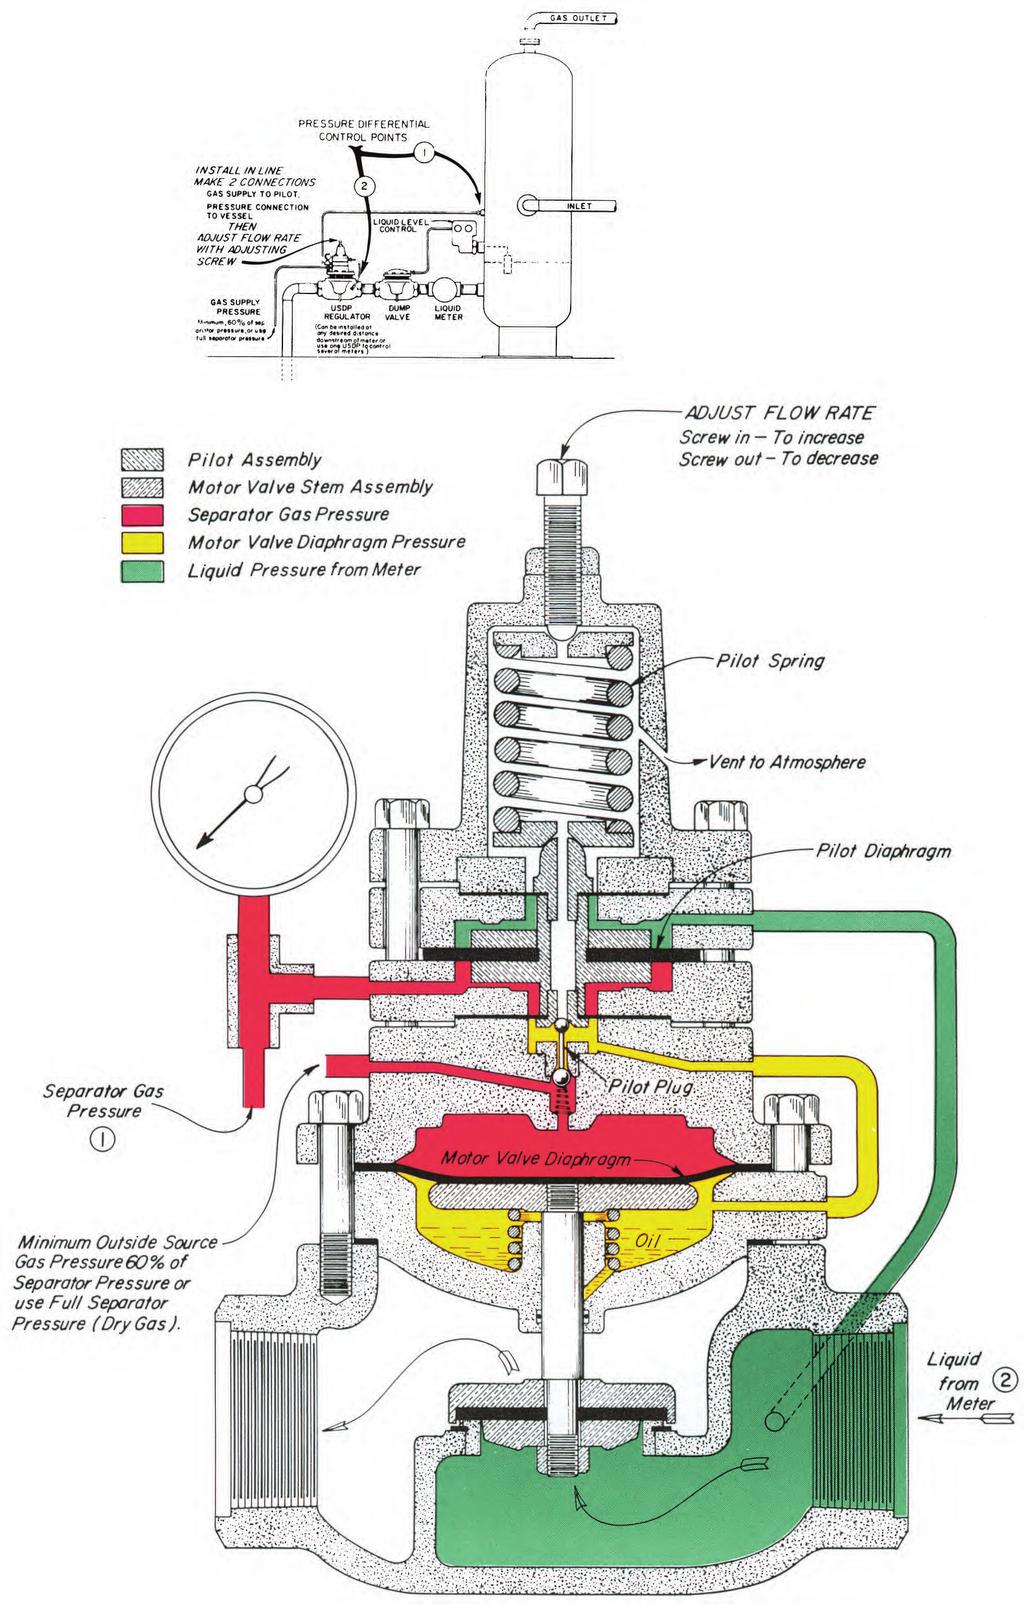 OPERATION: The Pilot Diaphragm senses the Differential Pressure between Separator Gas Pressure (Red) and the Liquid Pressure (Green).